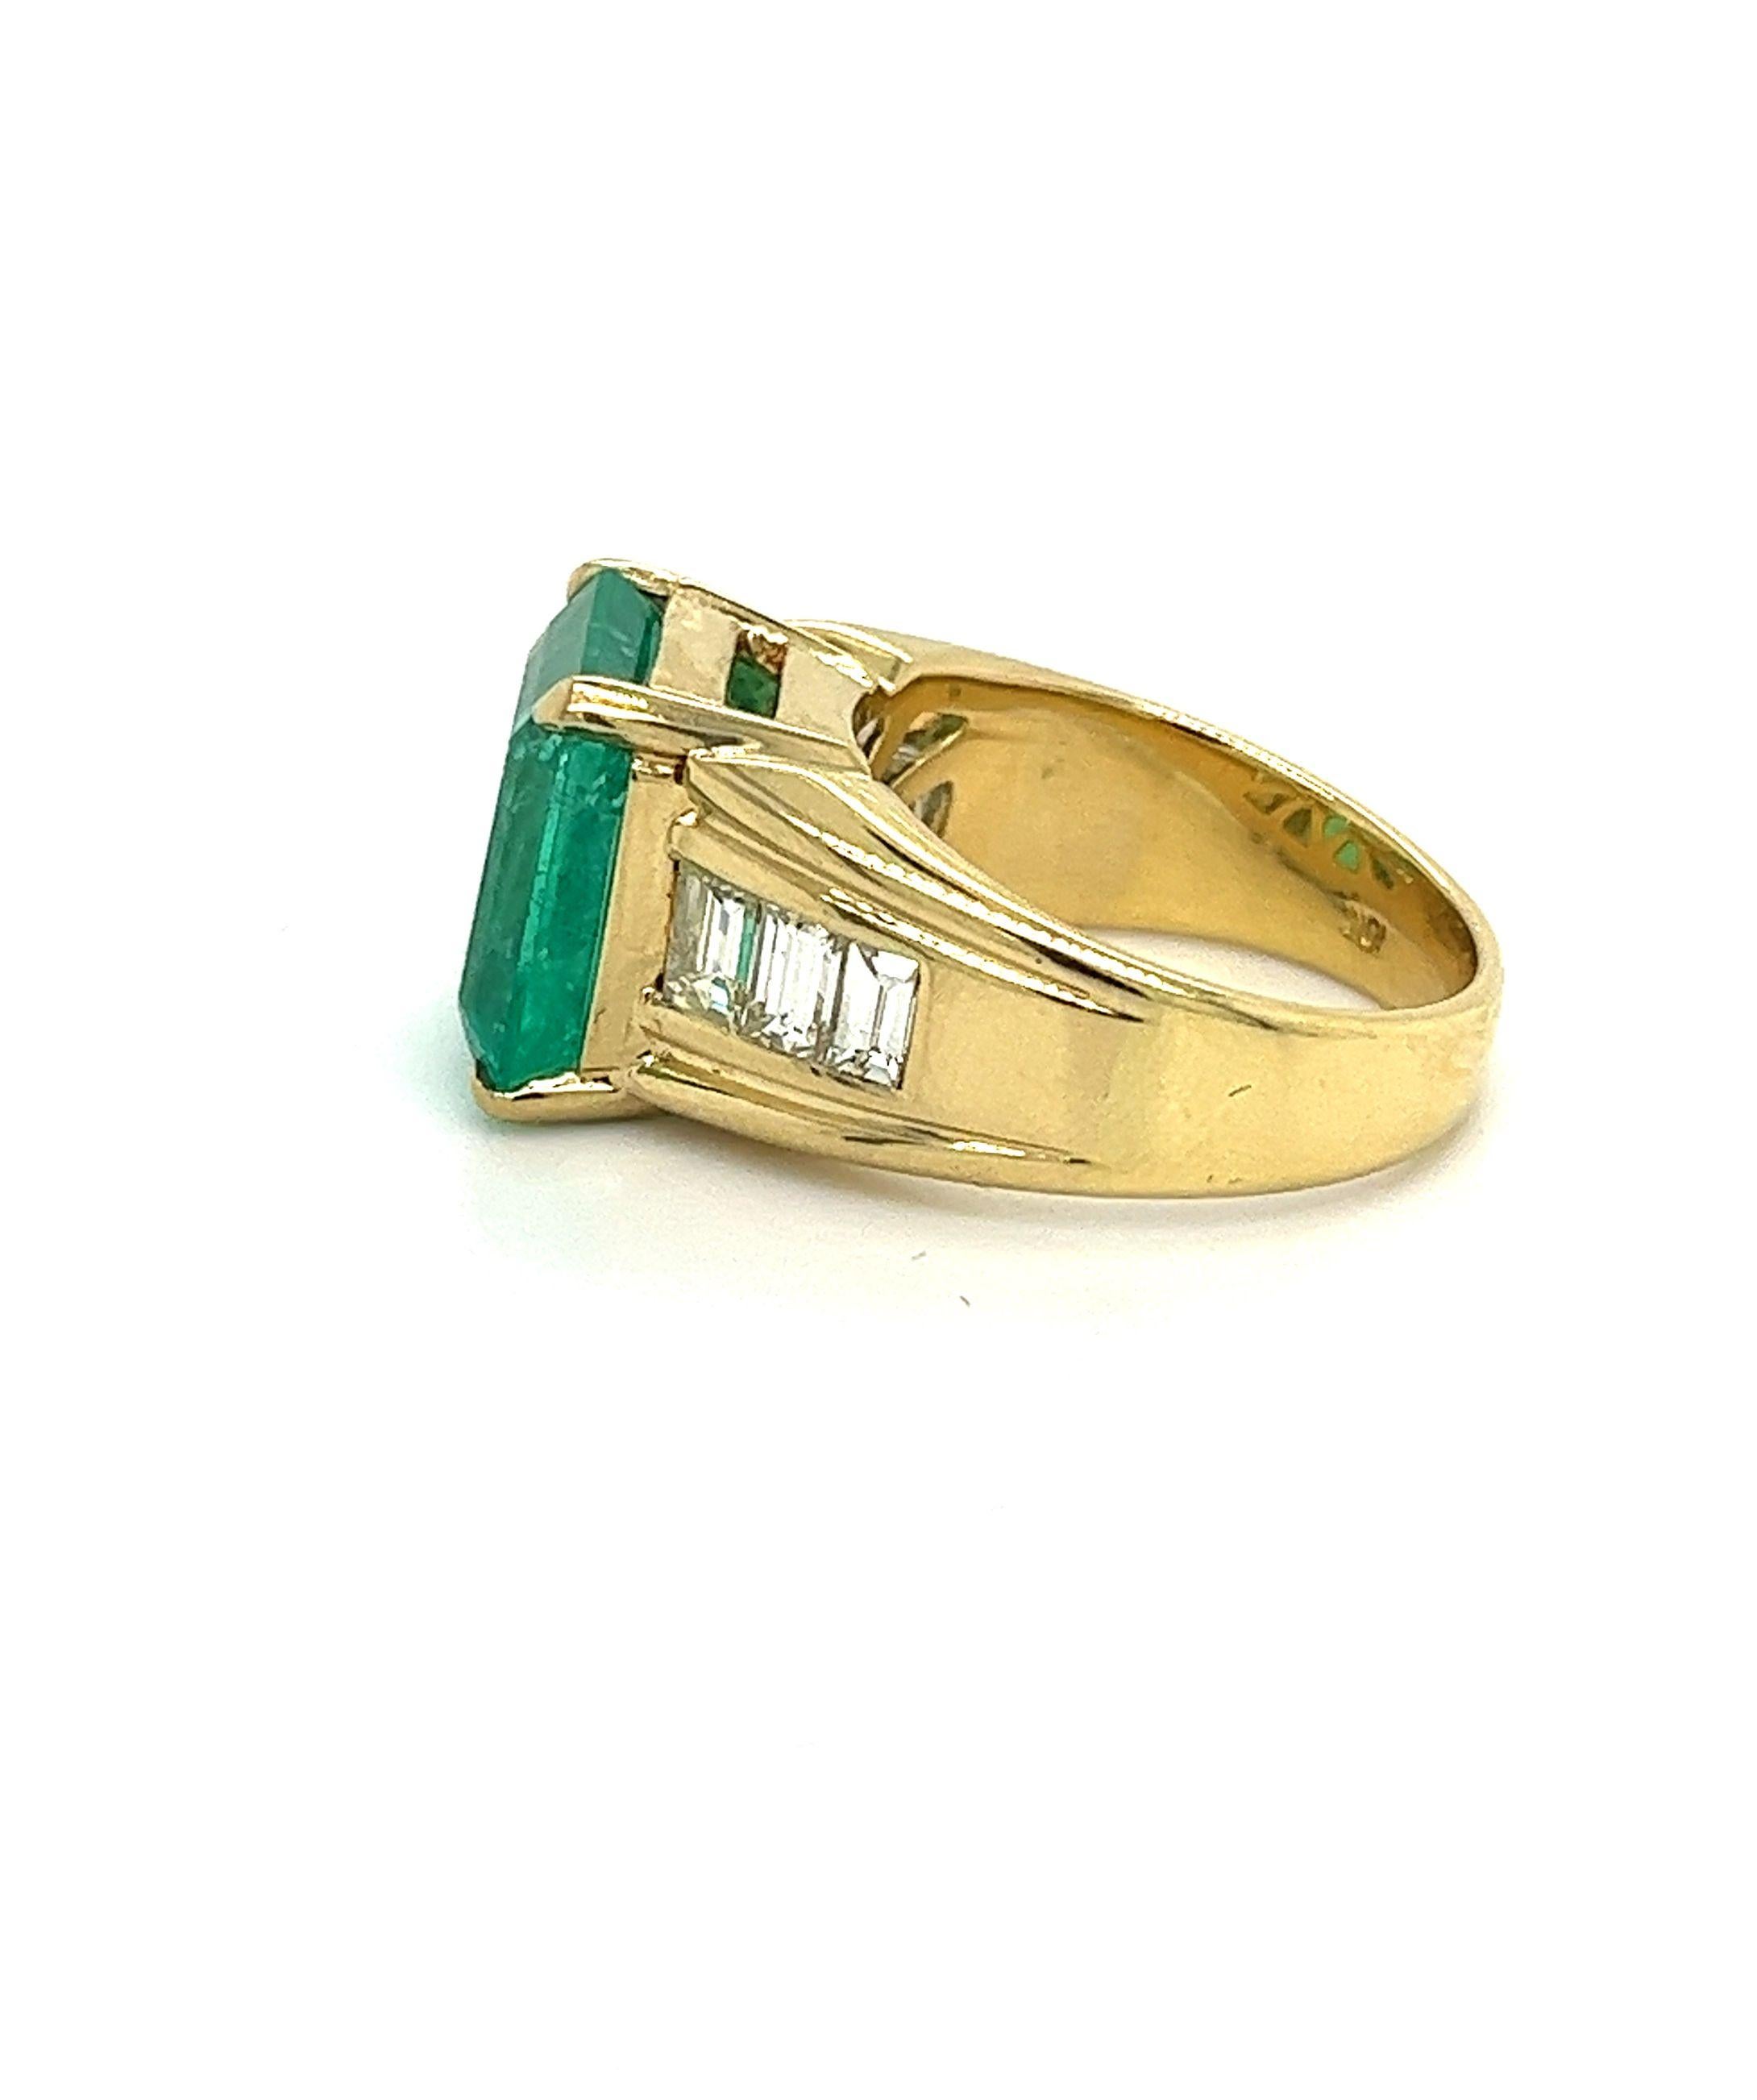 GIA Certified 8.64 Carat Colombian Emerald & Baguette Diamond Ring in 18K Gold  For Sale 1